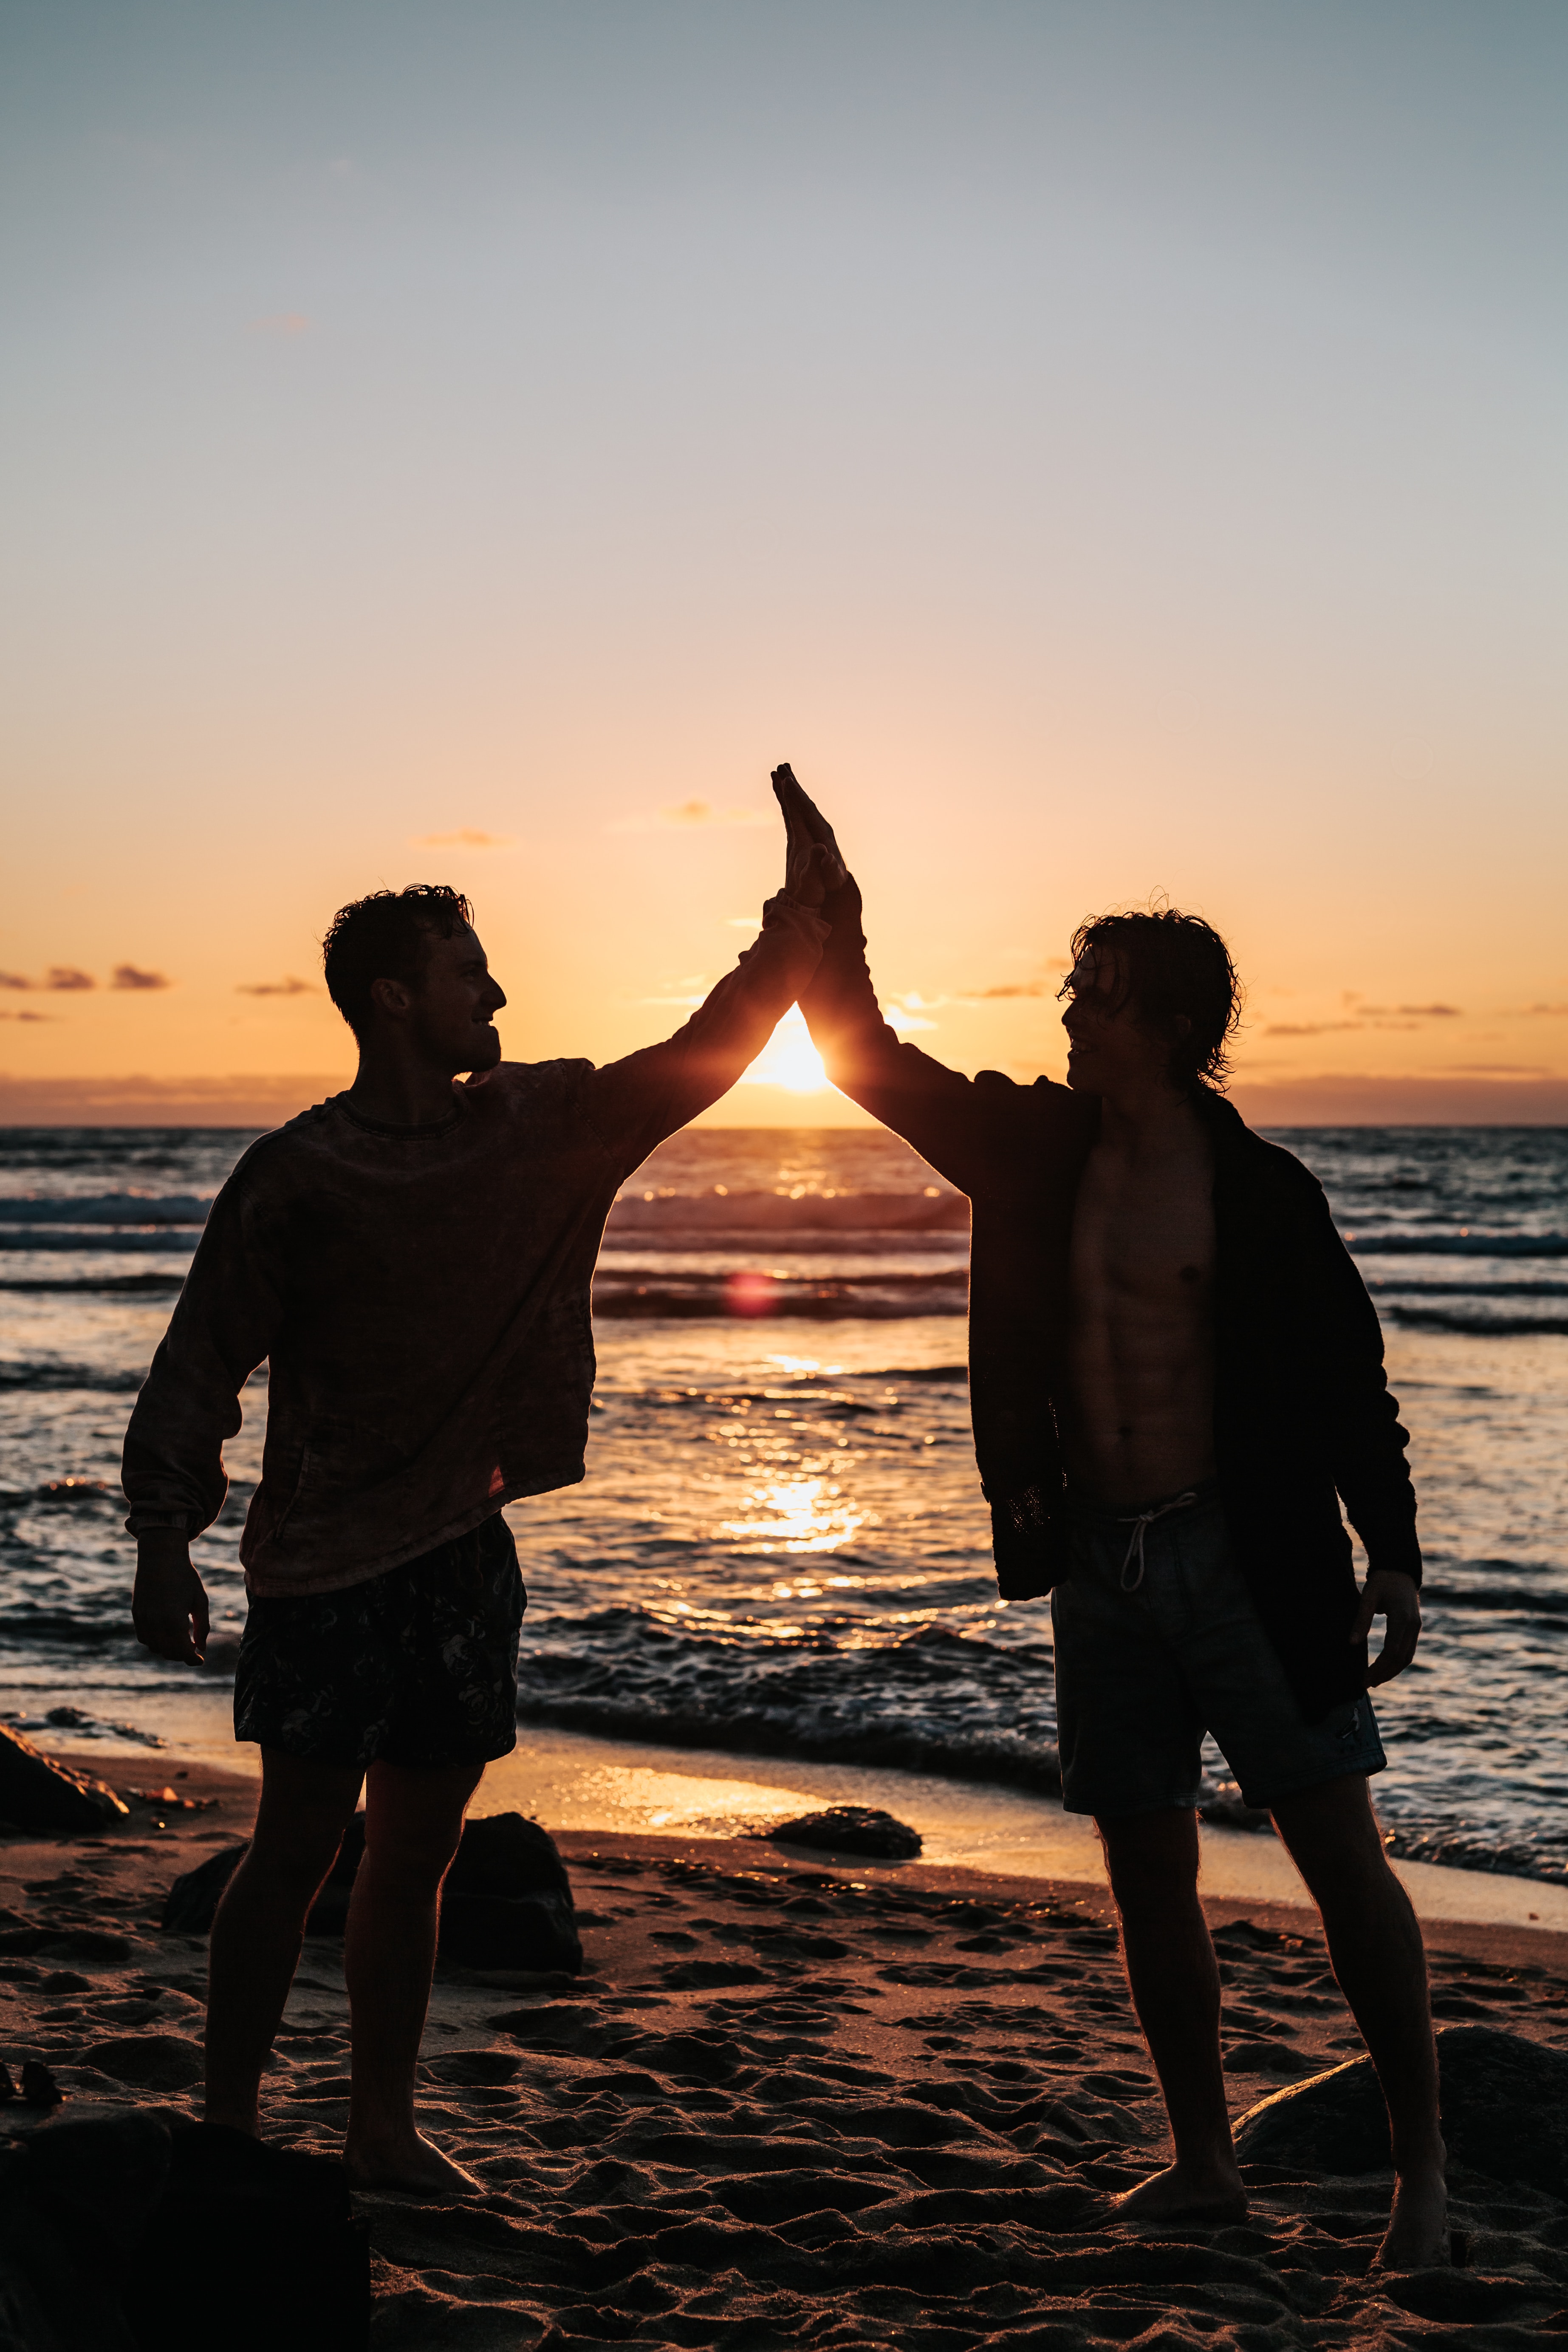 Two men at the beach during sunset | Source: Unsplash